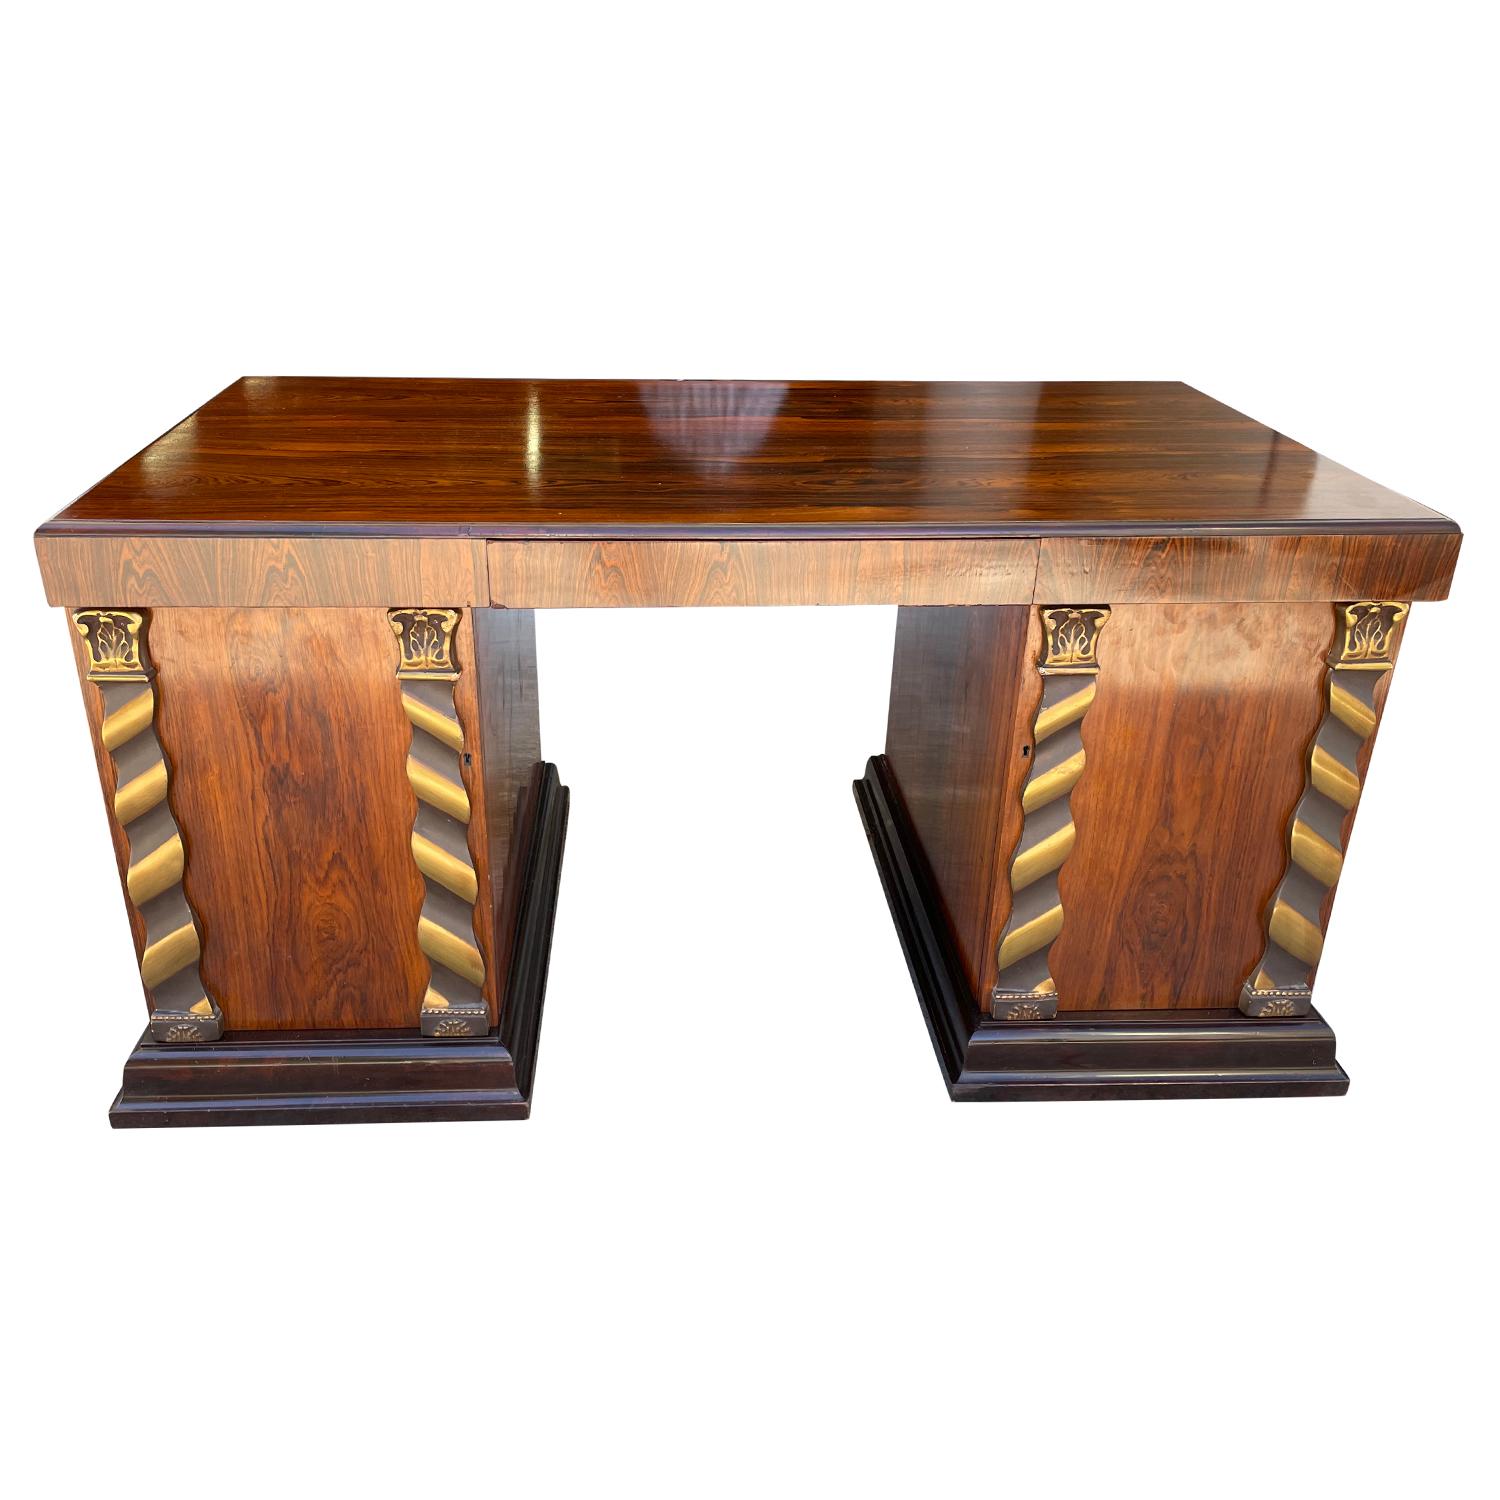 A freestanding, vintage Art Deco Swedish writing table made of hand crafted polished Jacarandawood, in good condition. The rectangular Scandinavian desk has one large drawer in the center and two cabinet doors with detailed bronze and brass inlays,